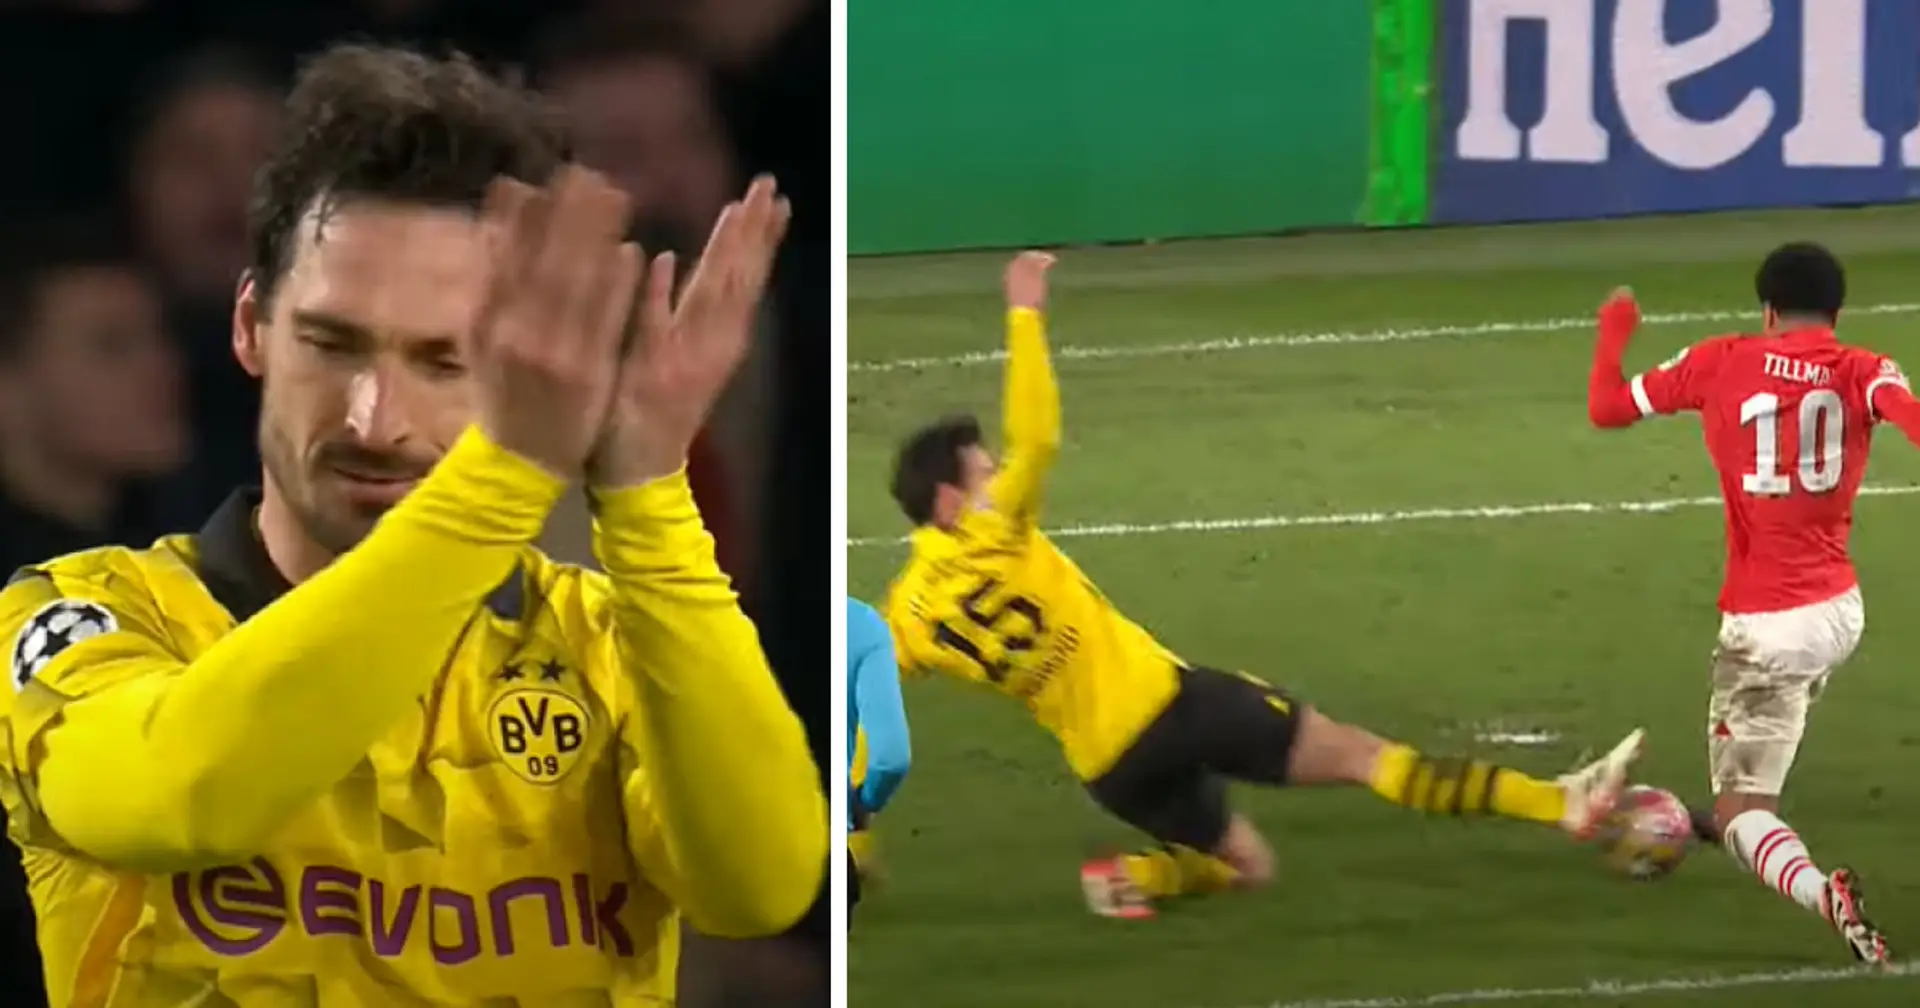 'Twitter waits for it. Twitter gets it': Mats Hummels hits out at 'joke of a penalty' on Malik Tillman in Dortmund game